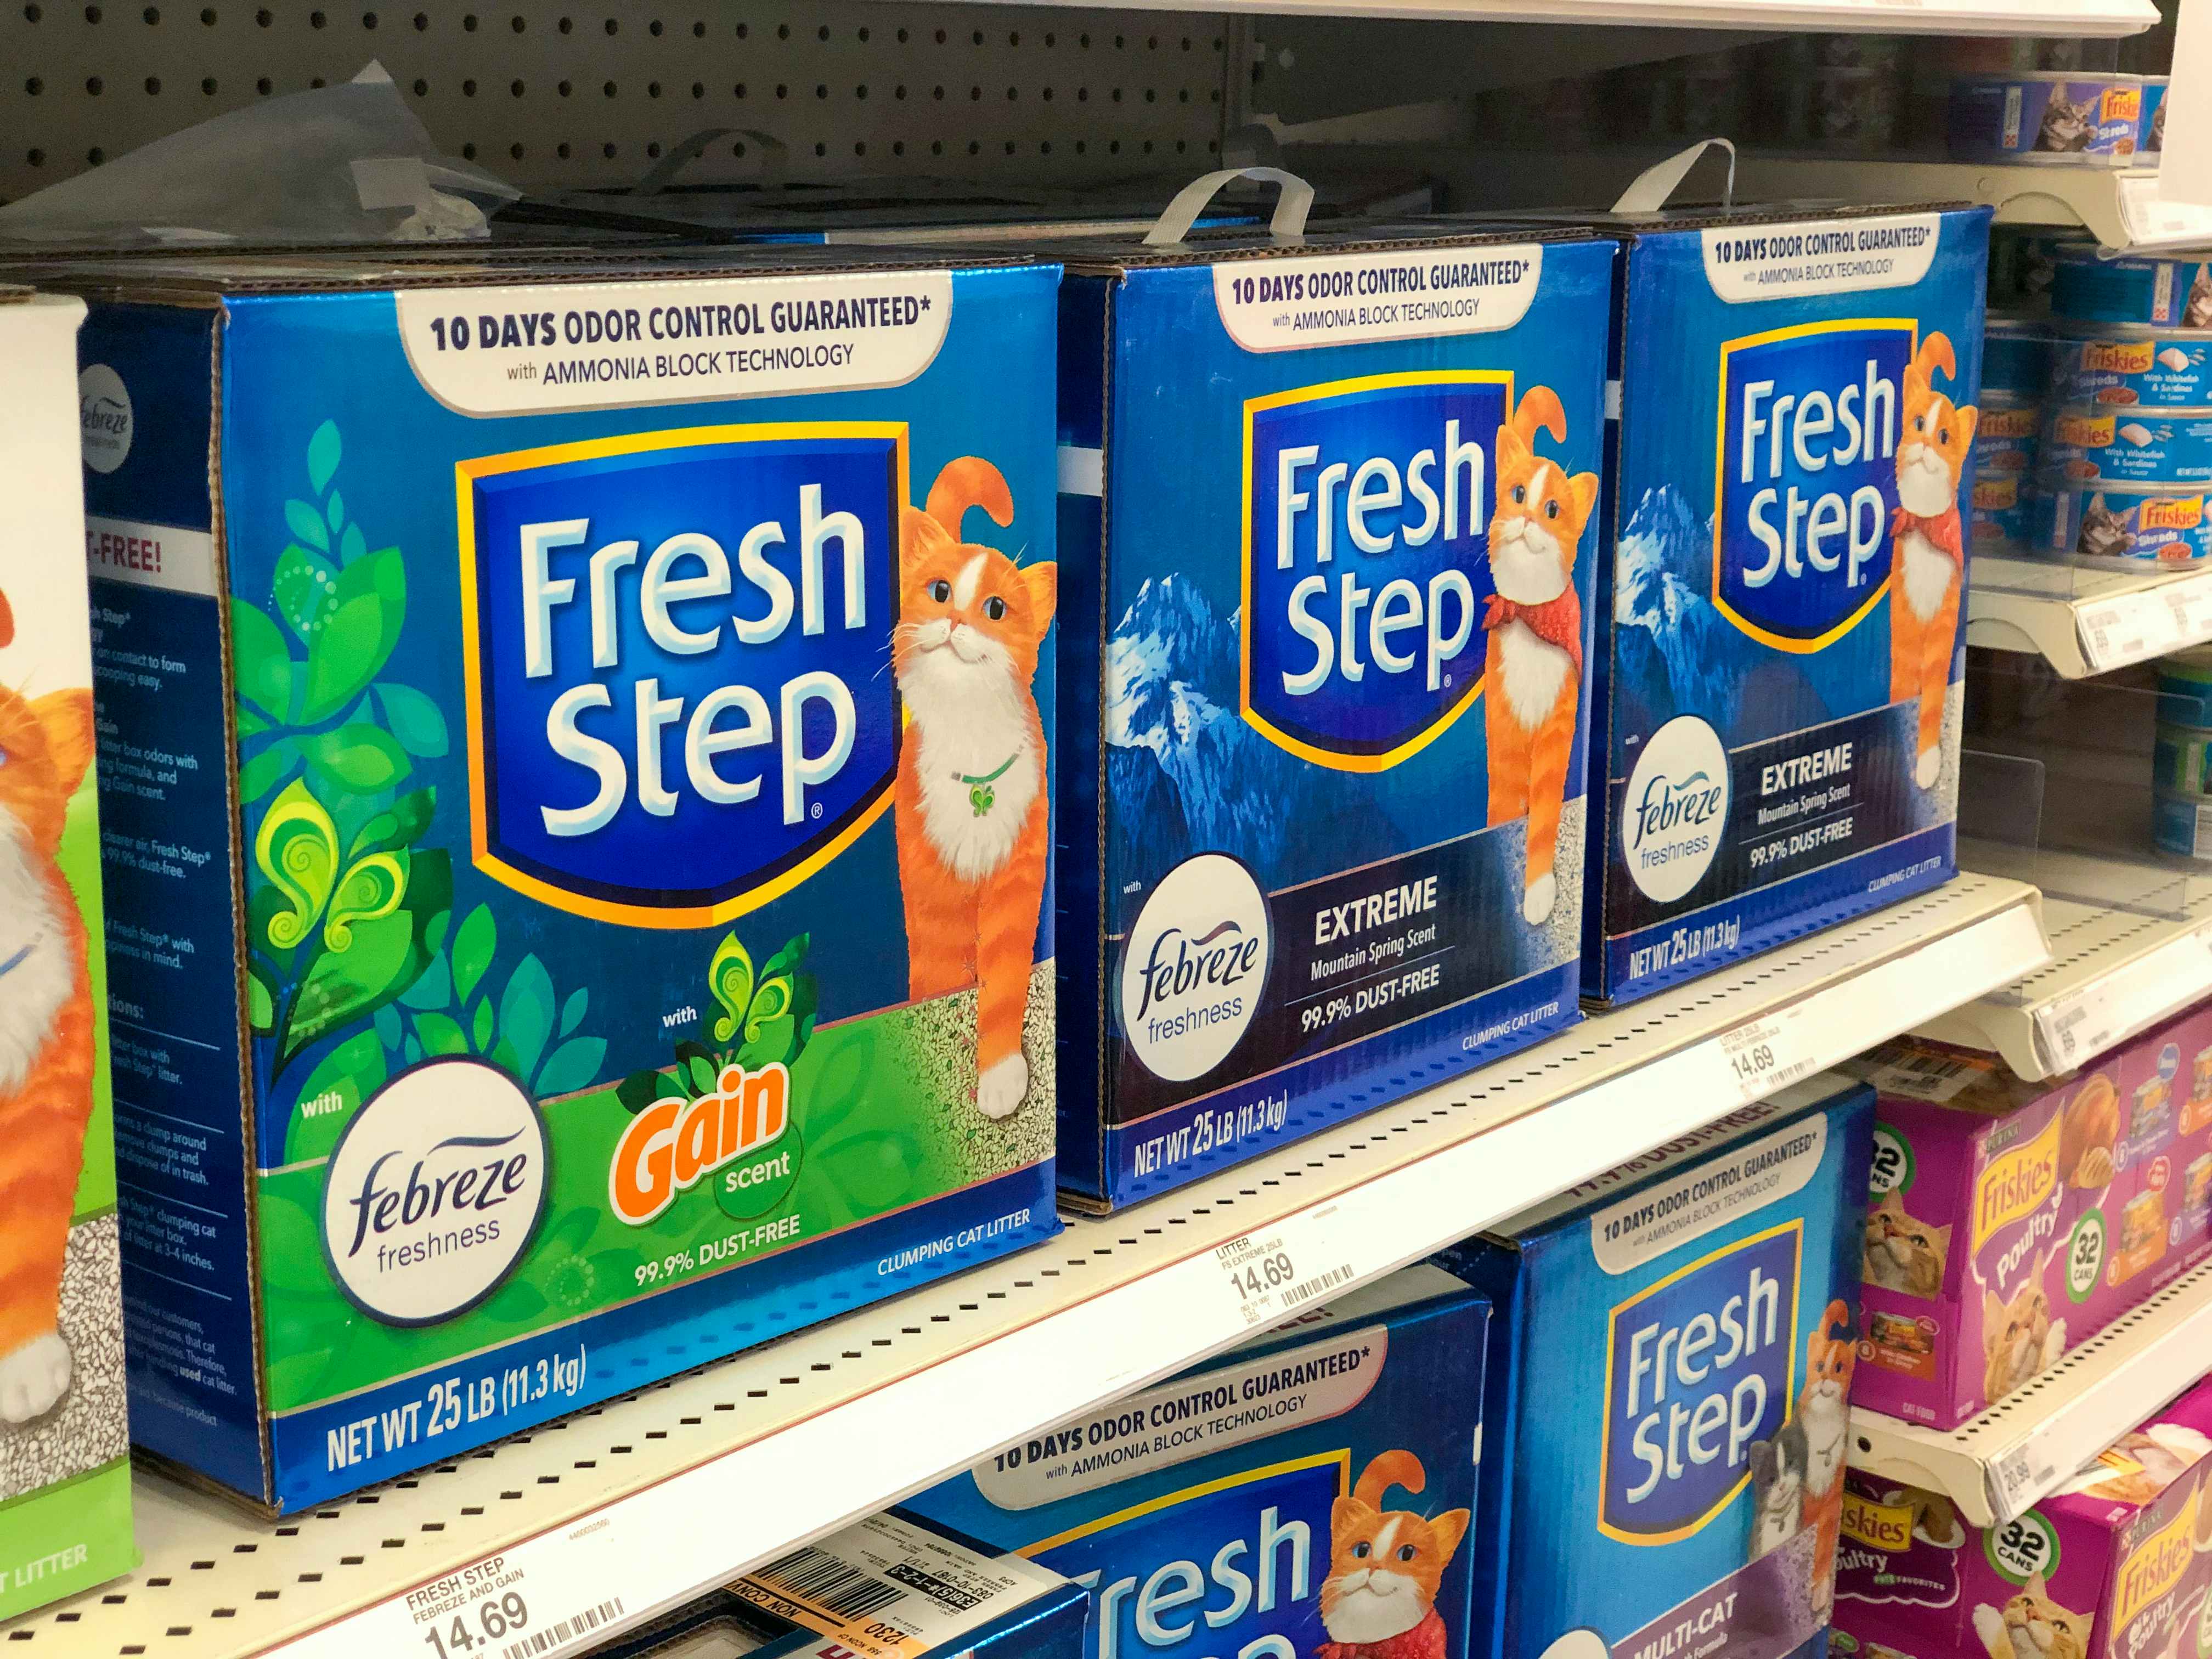 Fresh Step cat litter in a store aisle